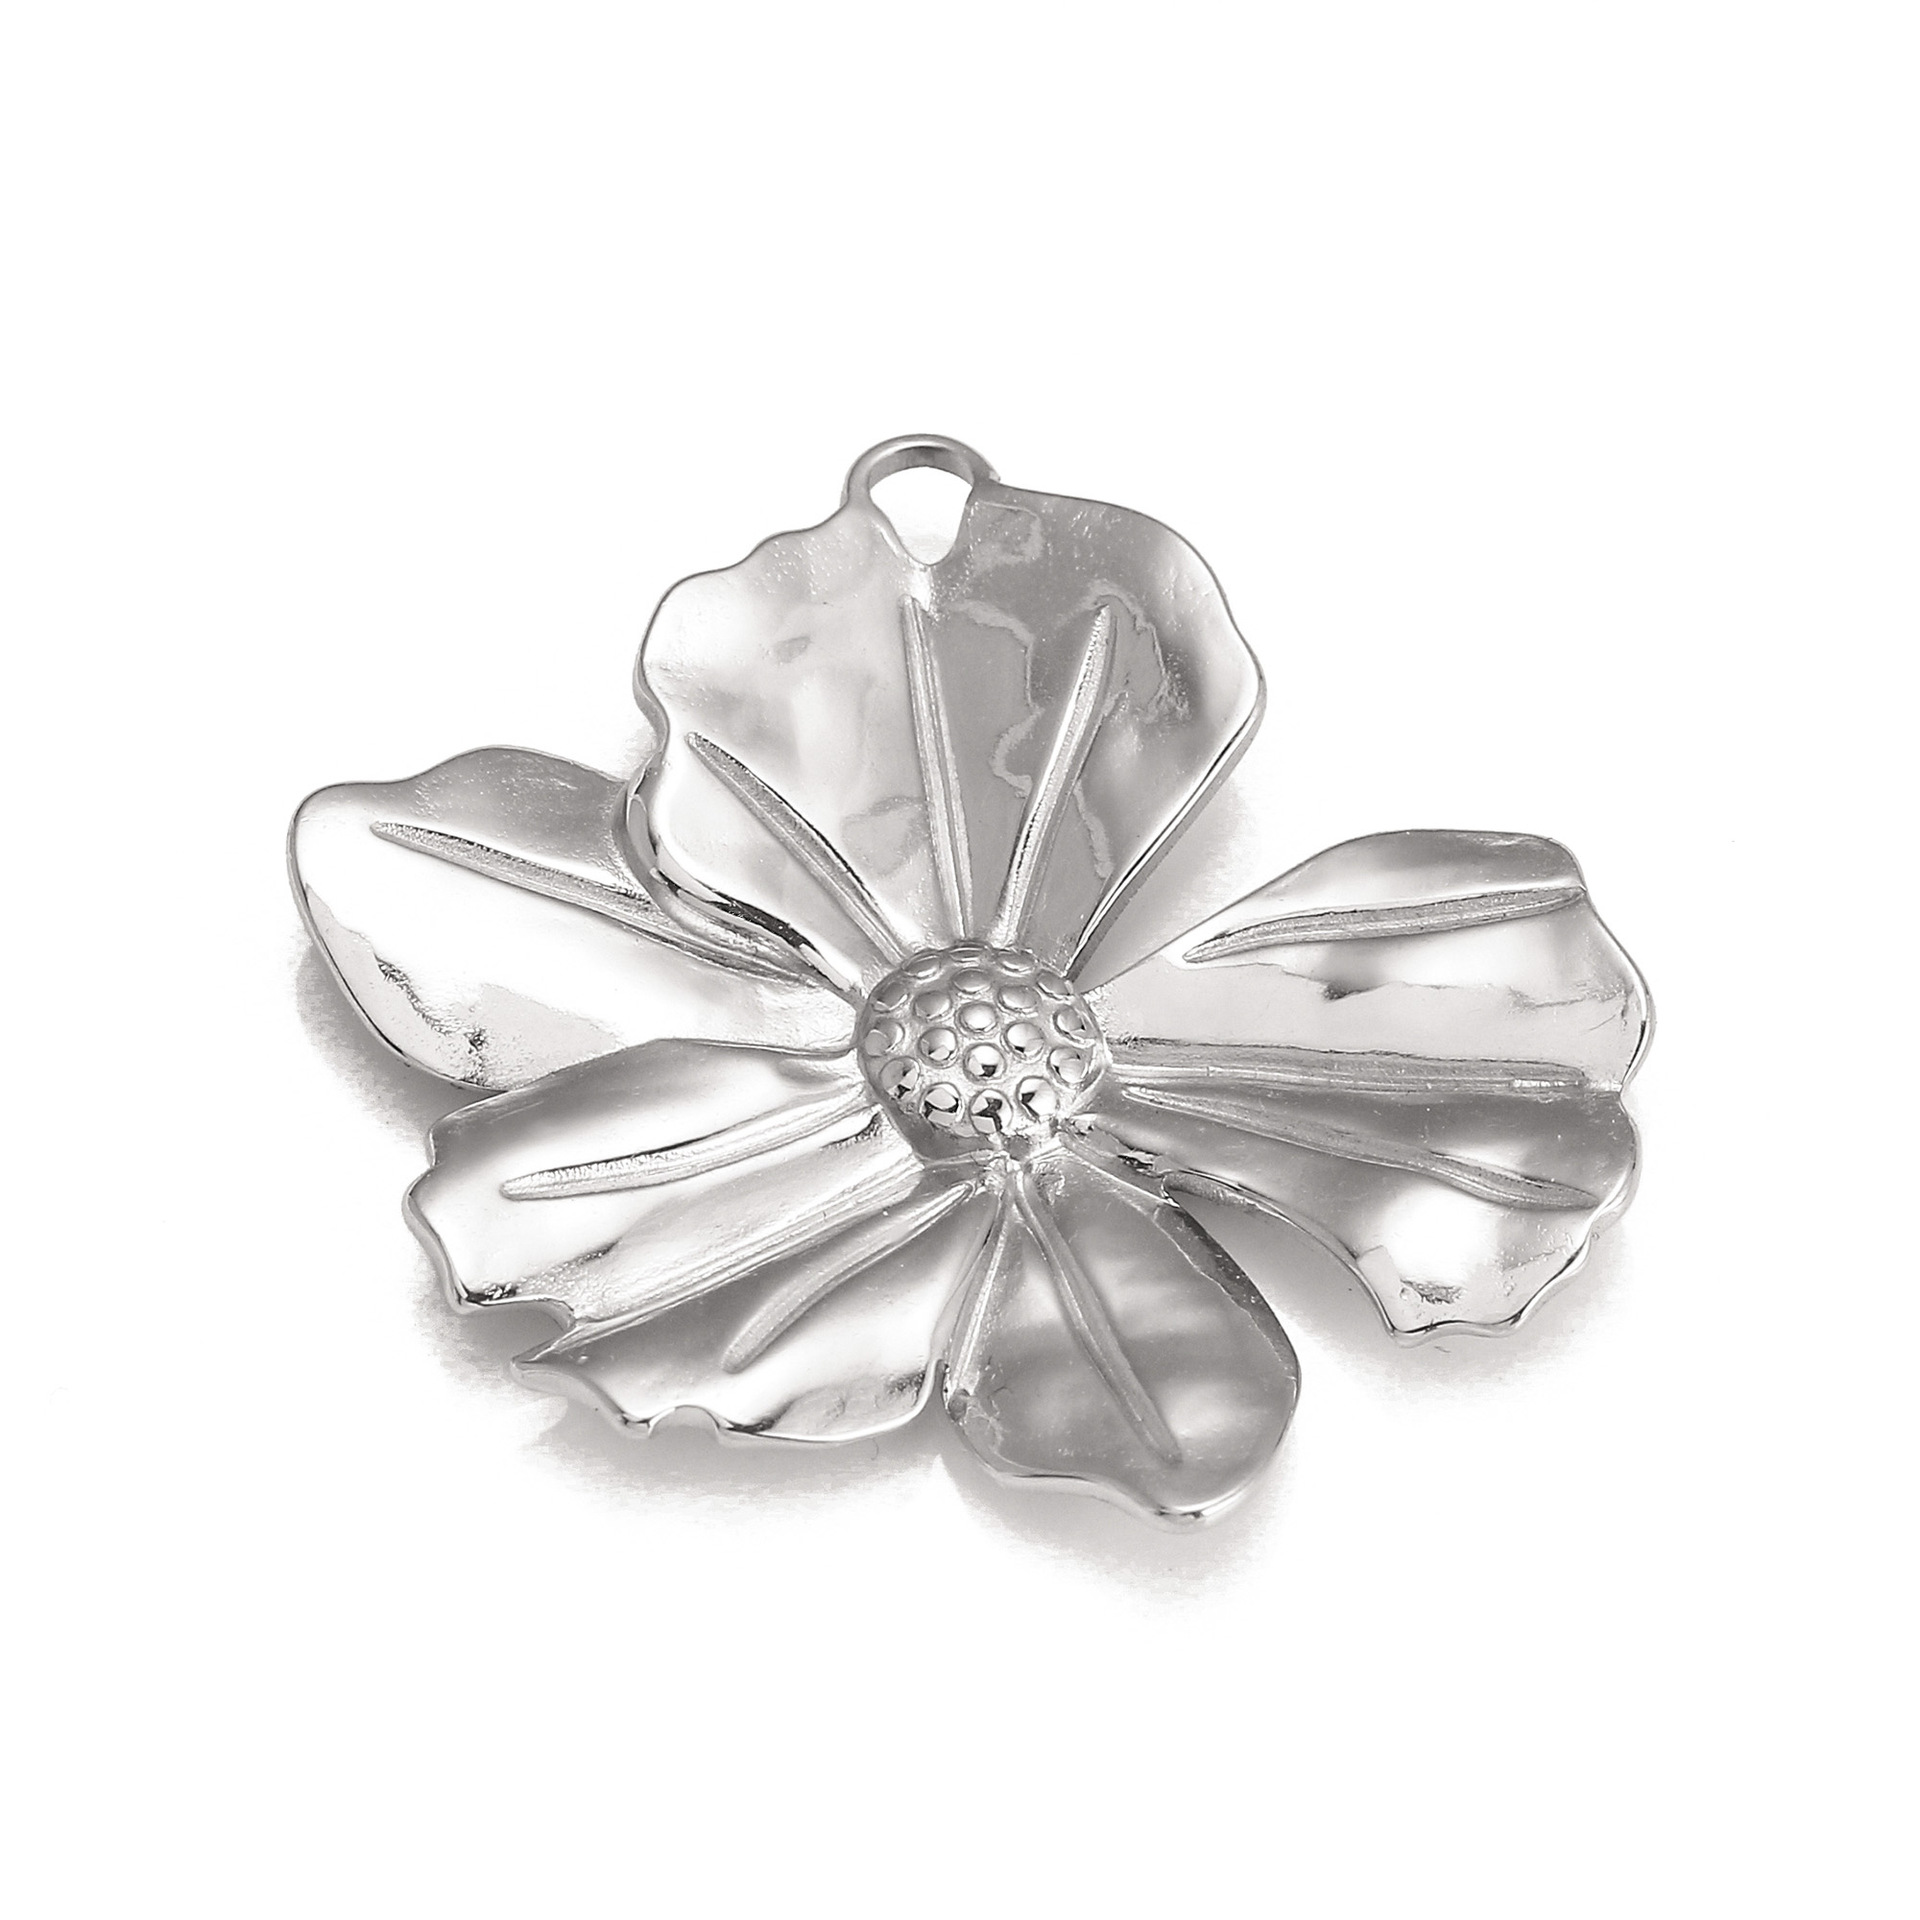 2:Silver Flower (large)